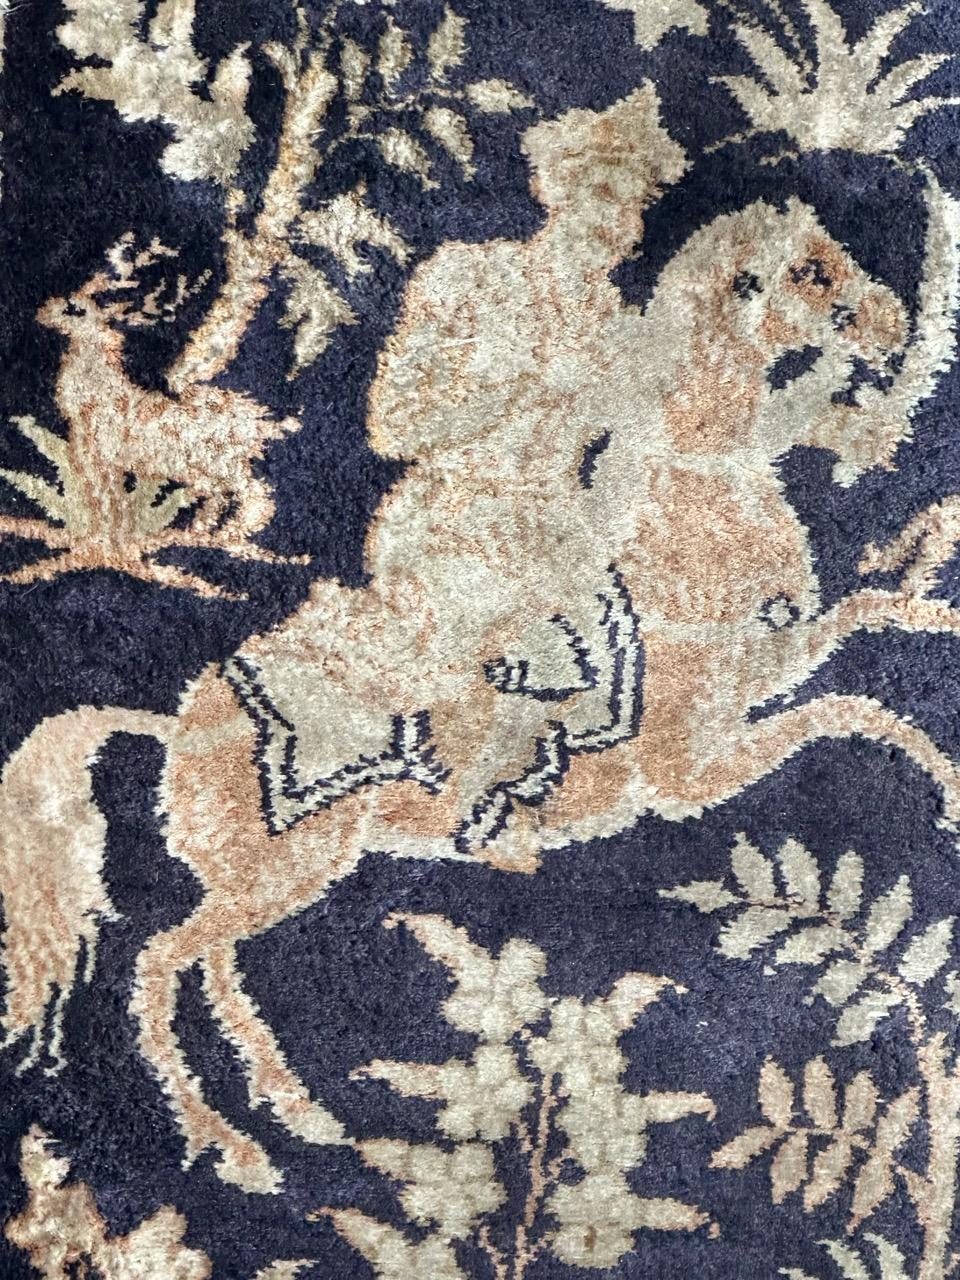 Nice vintage Chinese silk rug with a design of Persian rugs with hunters on horseback, in style of Safavid design. And nice colours with a navy blue on field and green, yellow and orange on design. Some faded colours in a side of the rug. Loses at